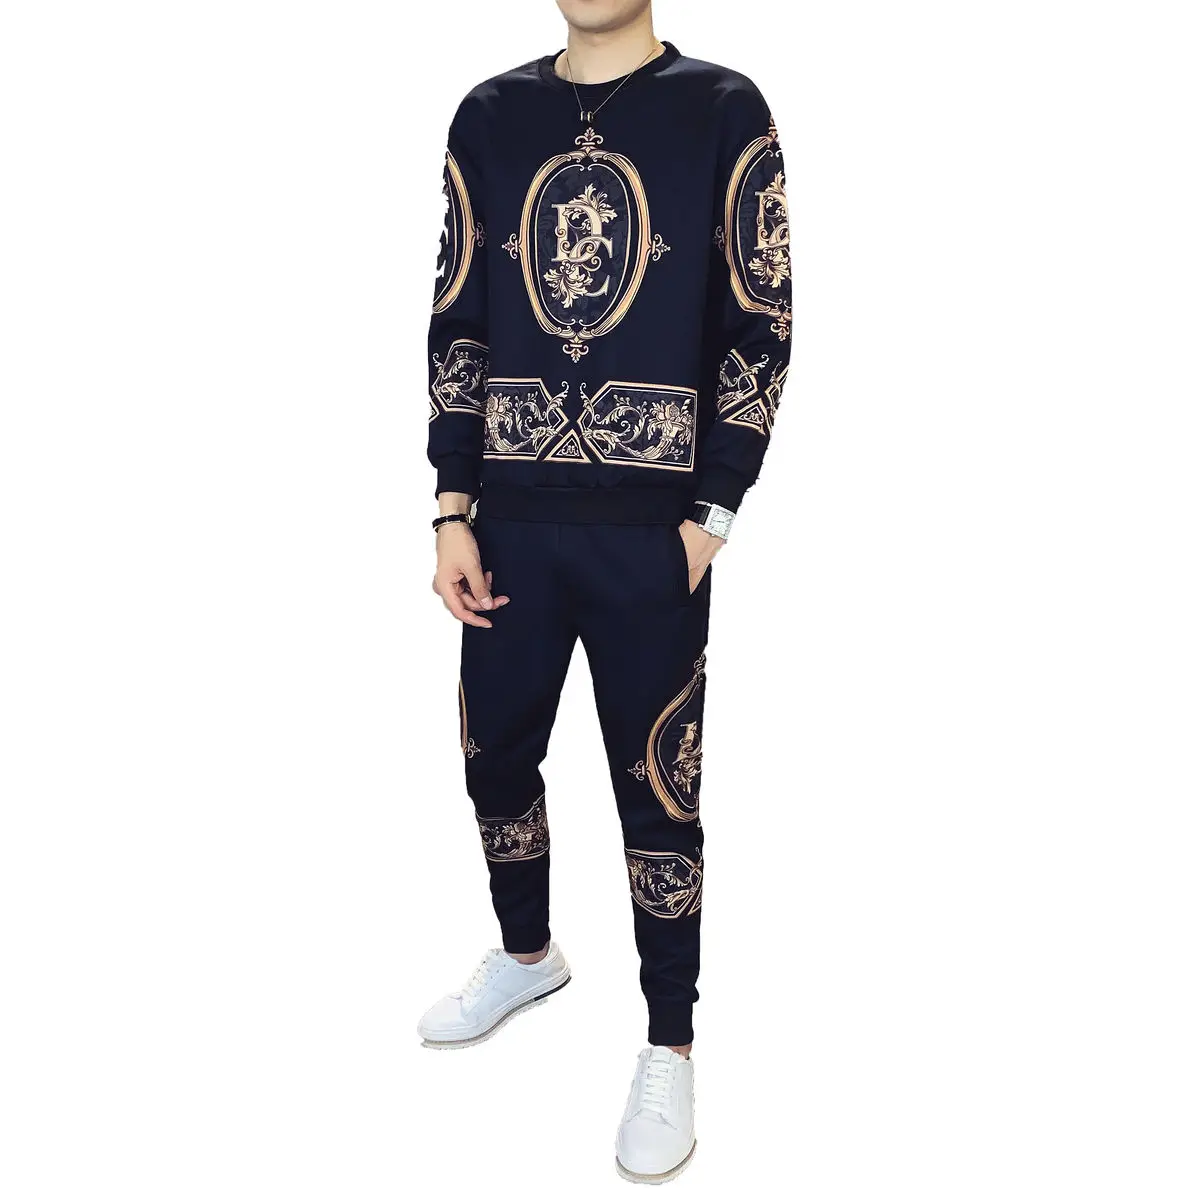 

Quality Luxury High Printed Sweater Autumn Round Neck Sweater Suit 2021 New Fashion Match Sports Casual Two Piece Set Men